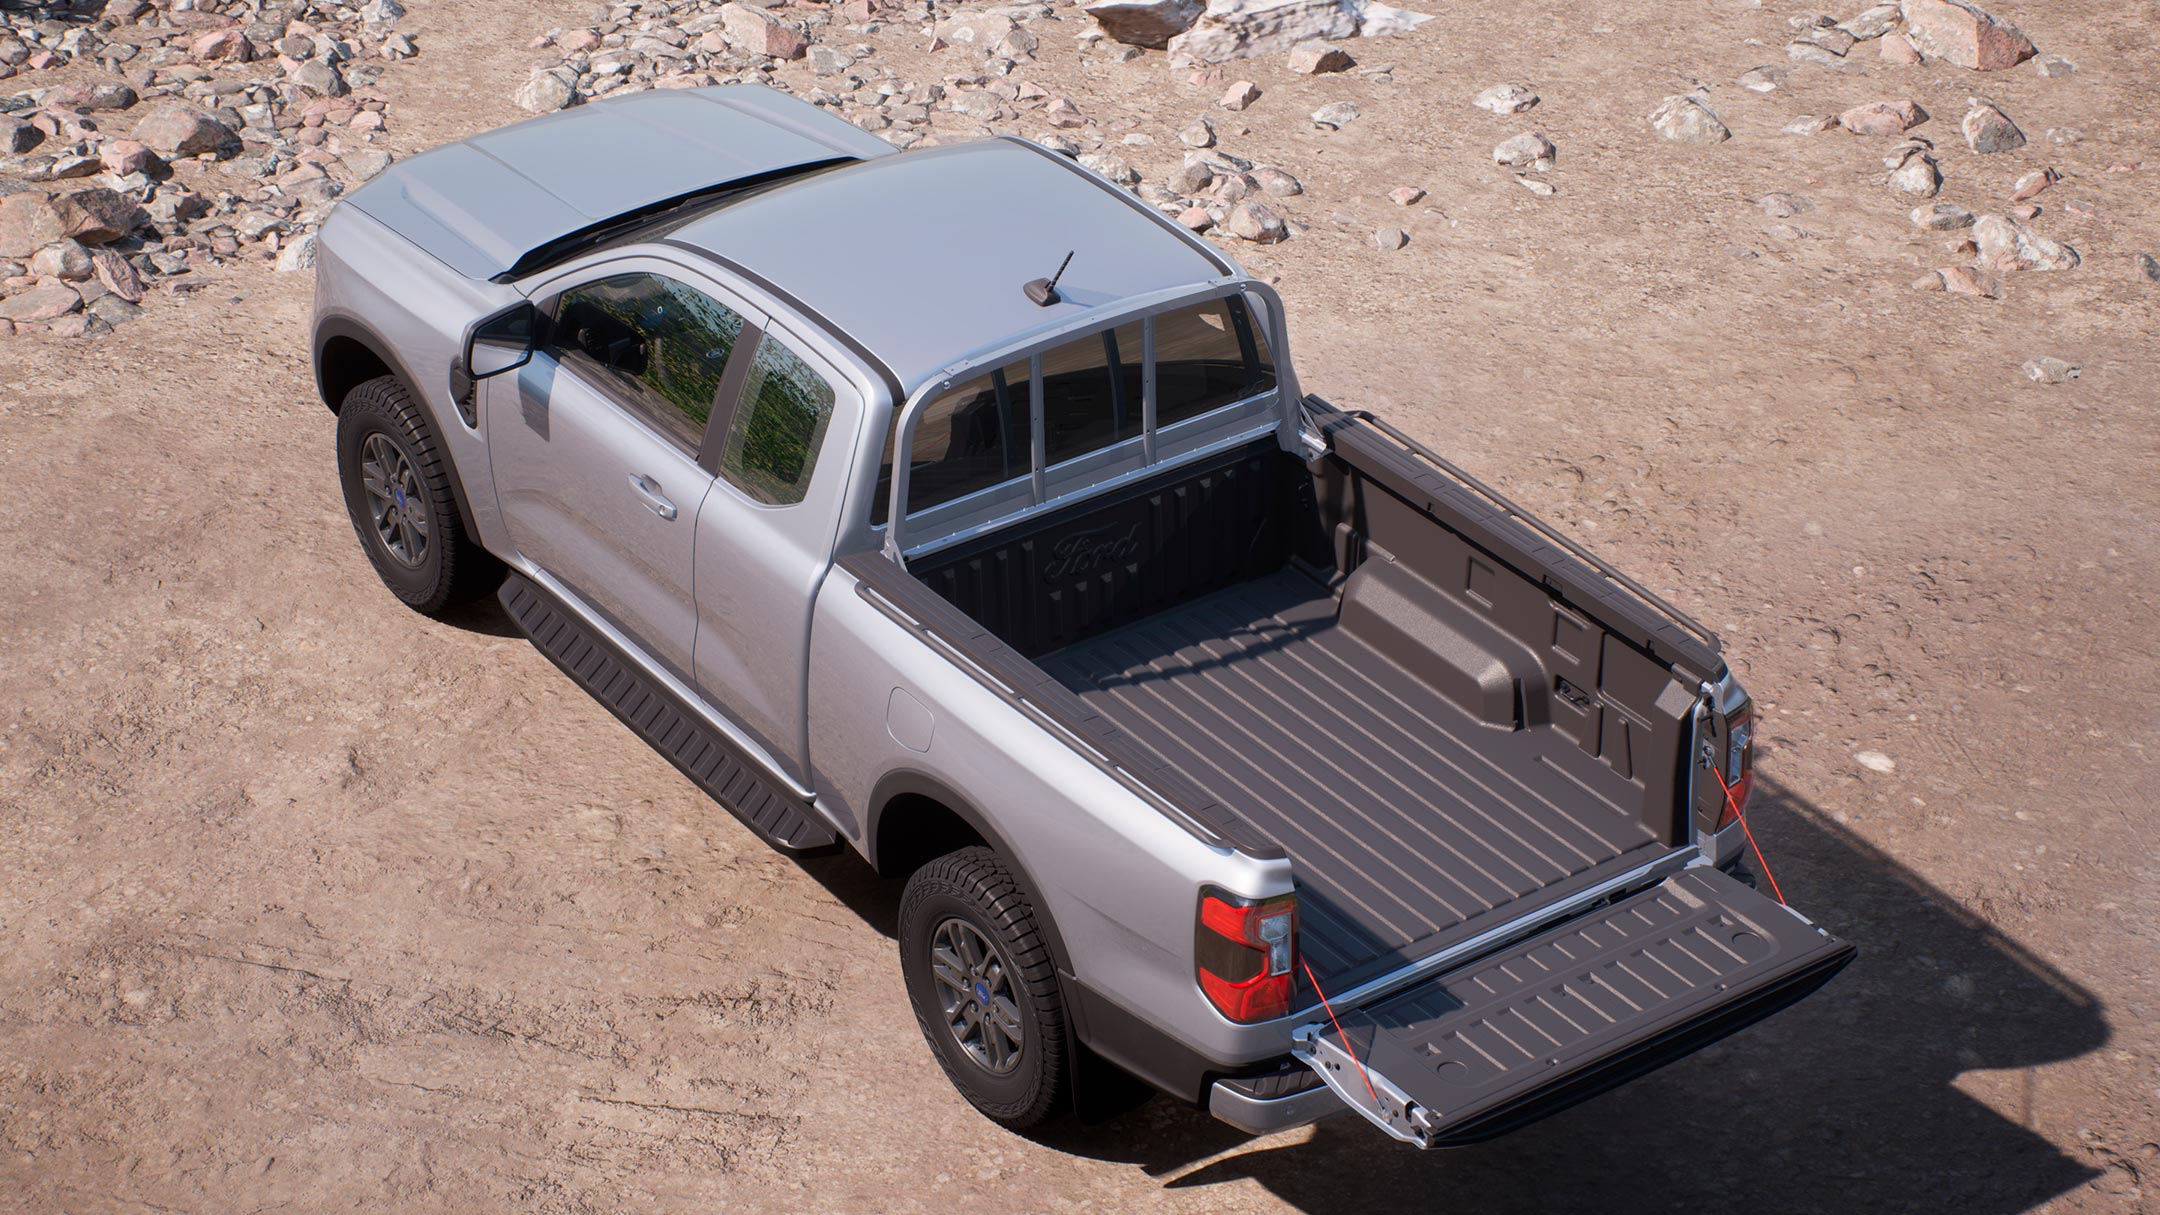 All-New Ford Ranger moondust silver 3/4 rear view from above showing load bed